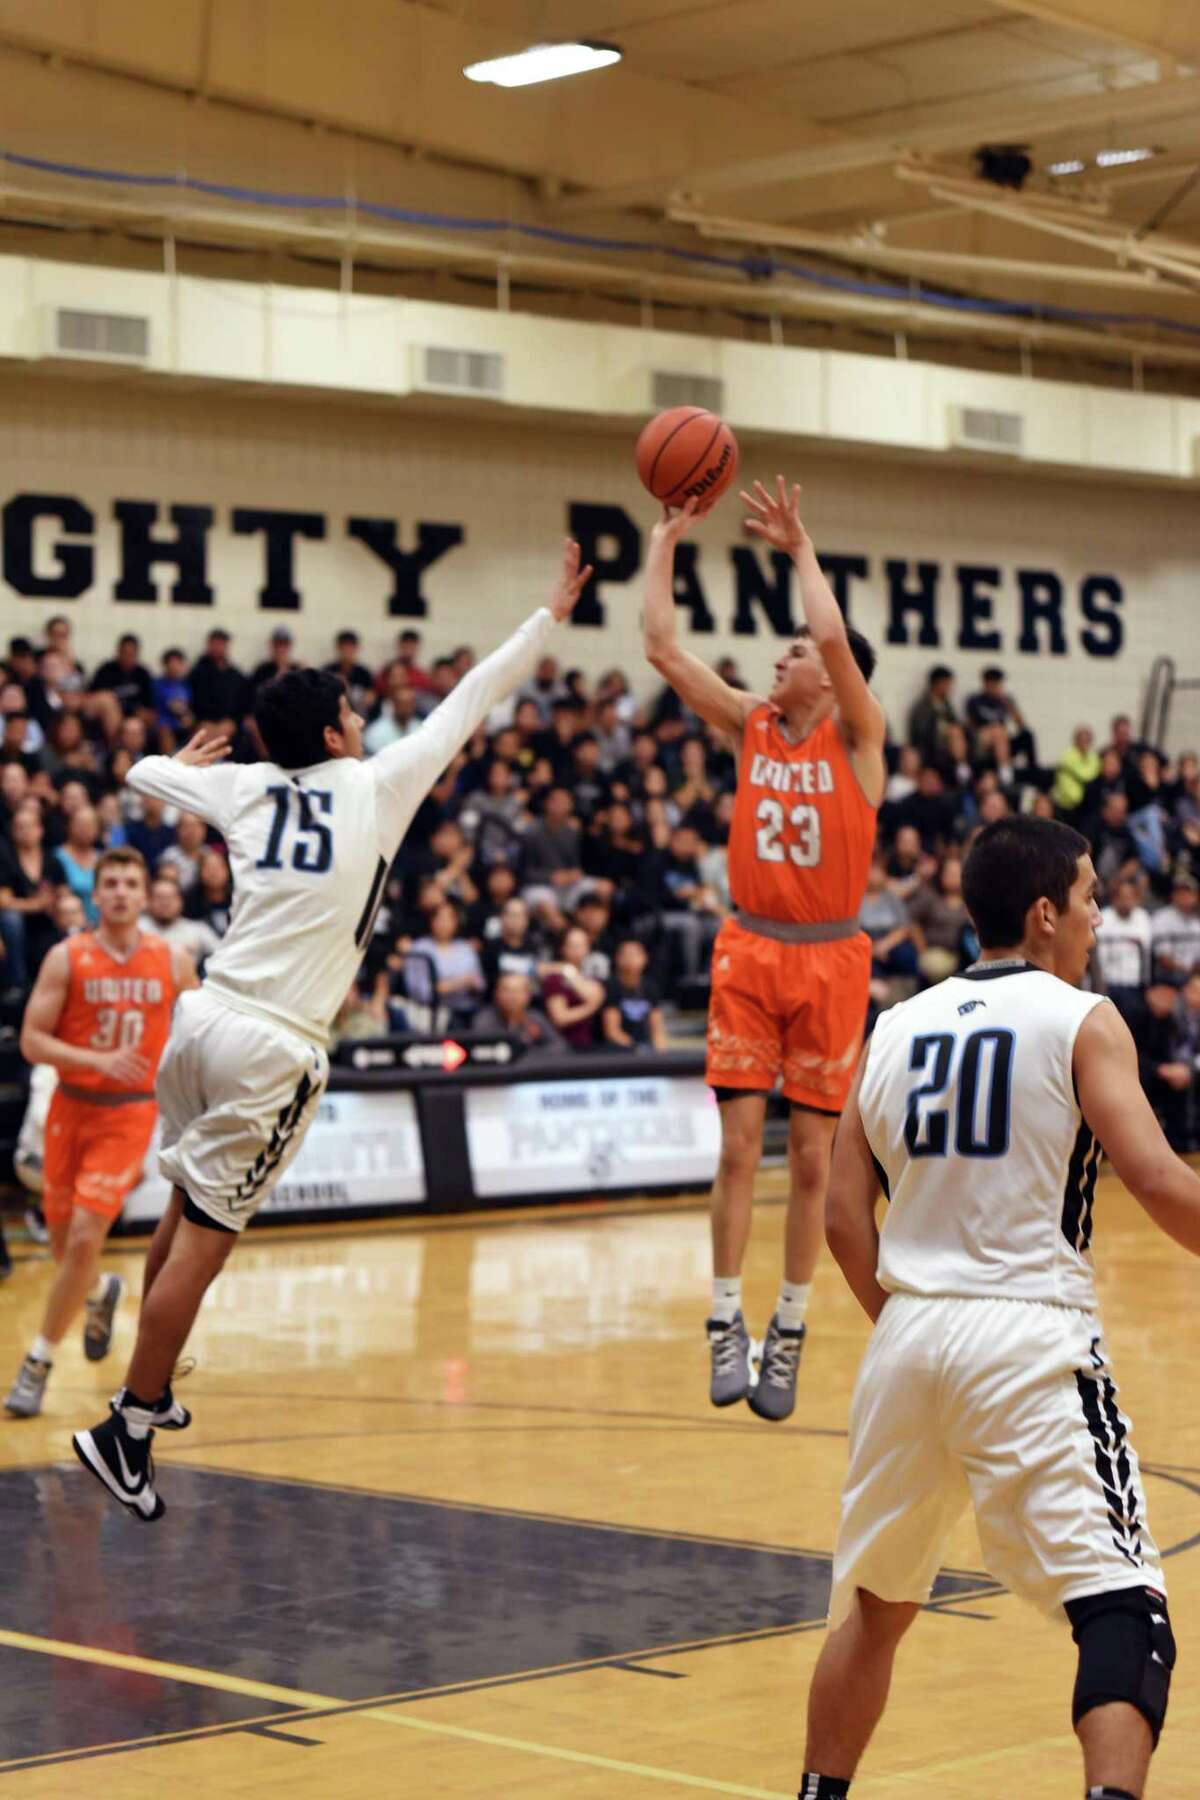 Andy Pompa scored a game-high 19 points Tuesday as United opened its title defense with a 60-56 victory at United South.